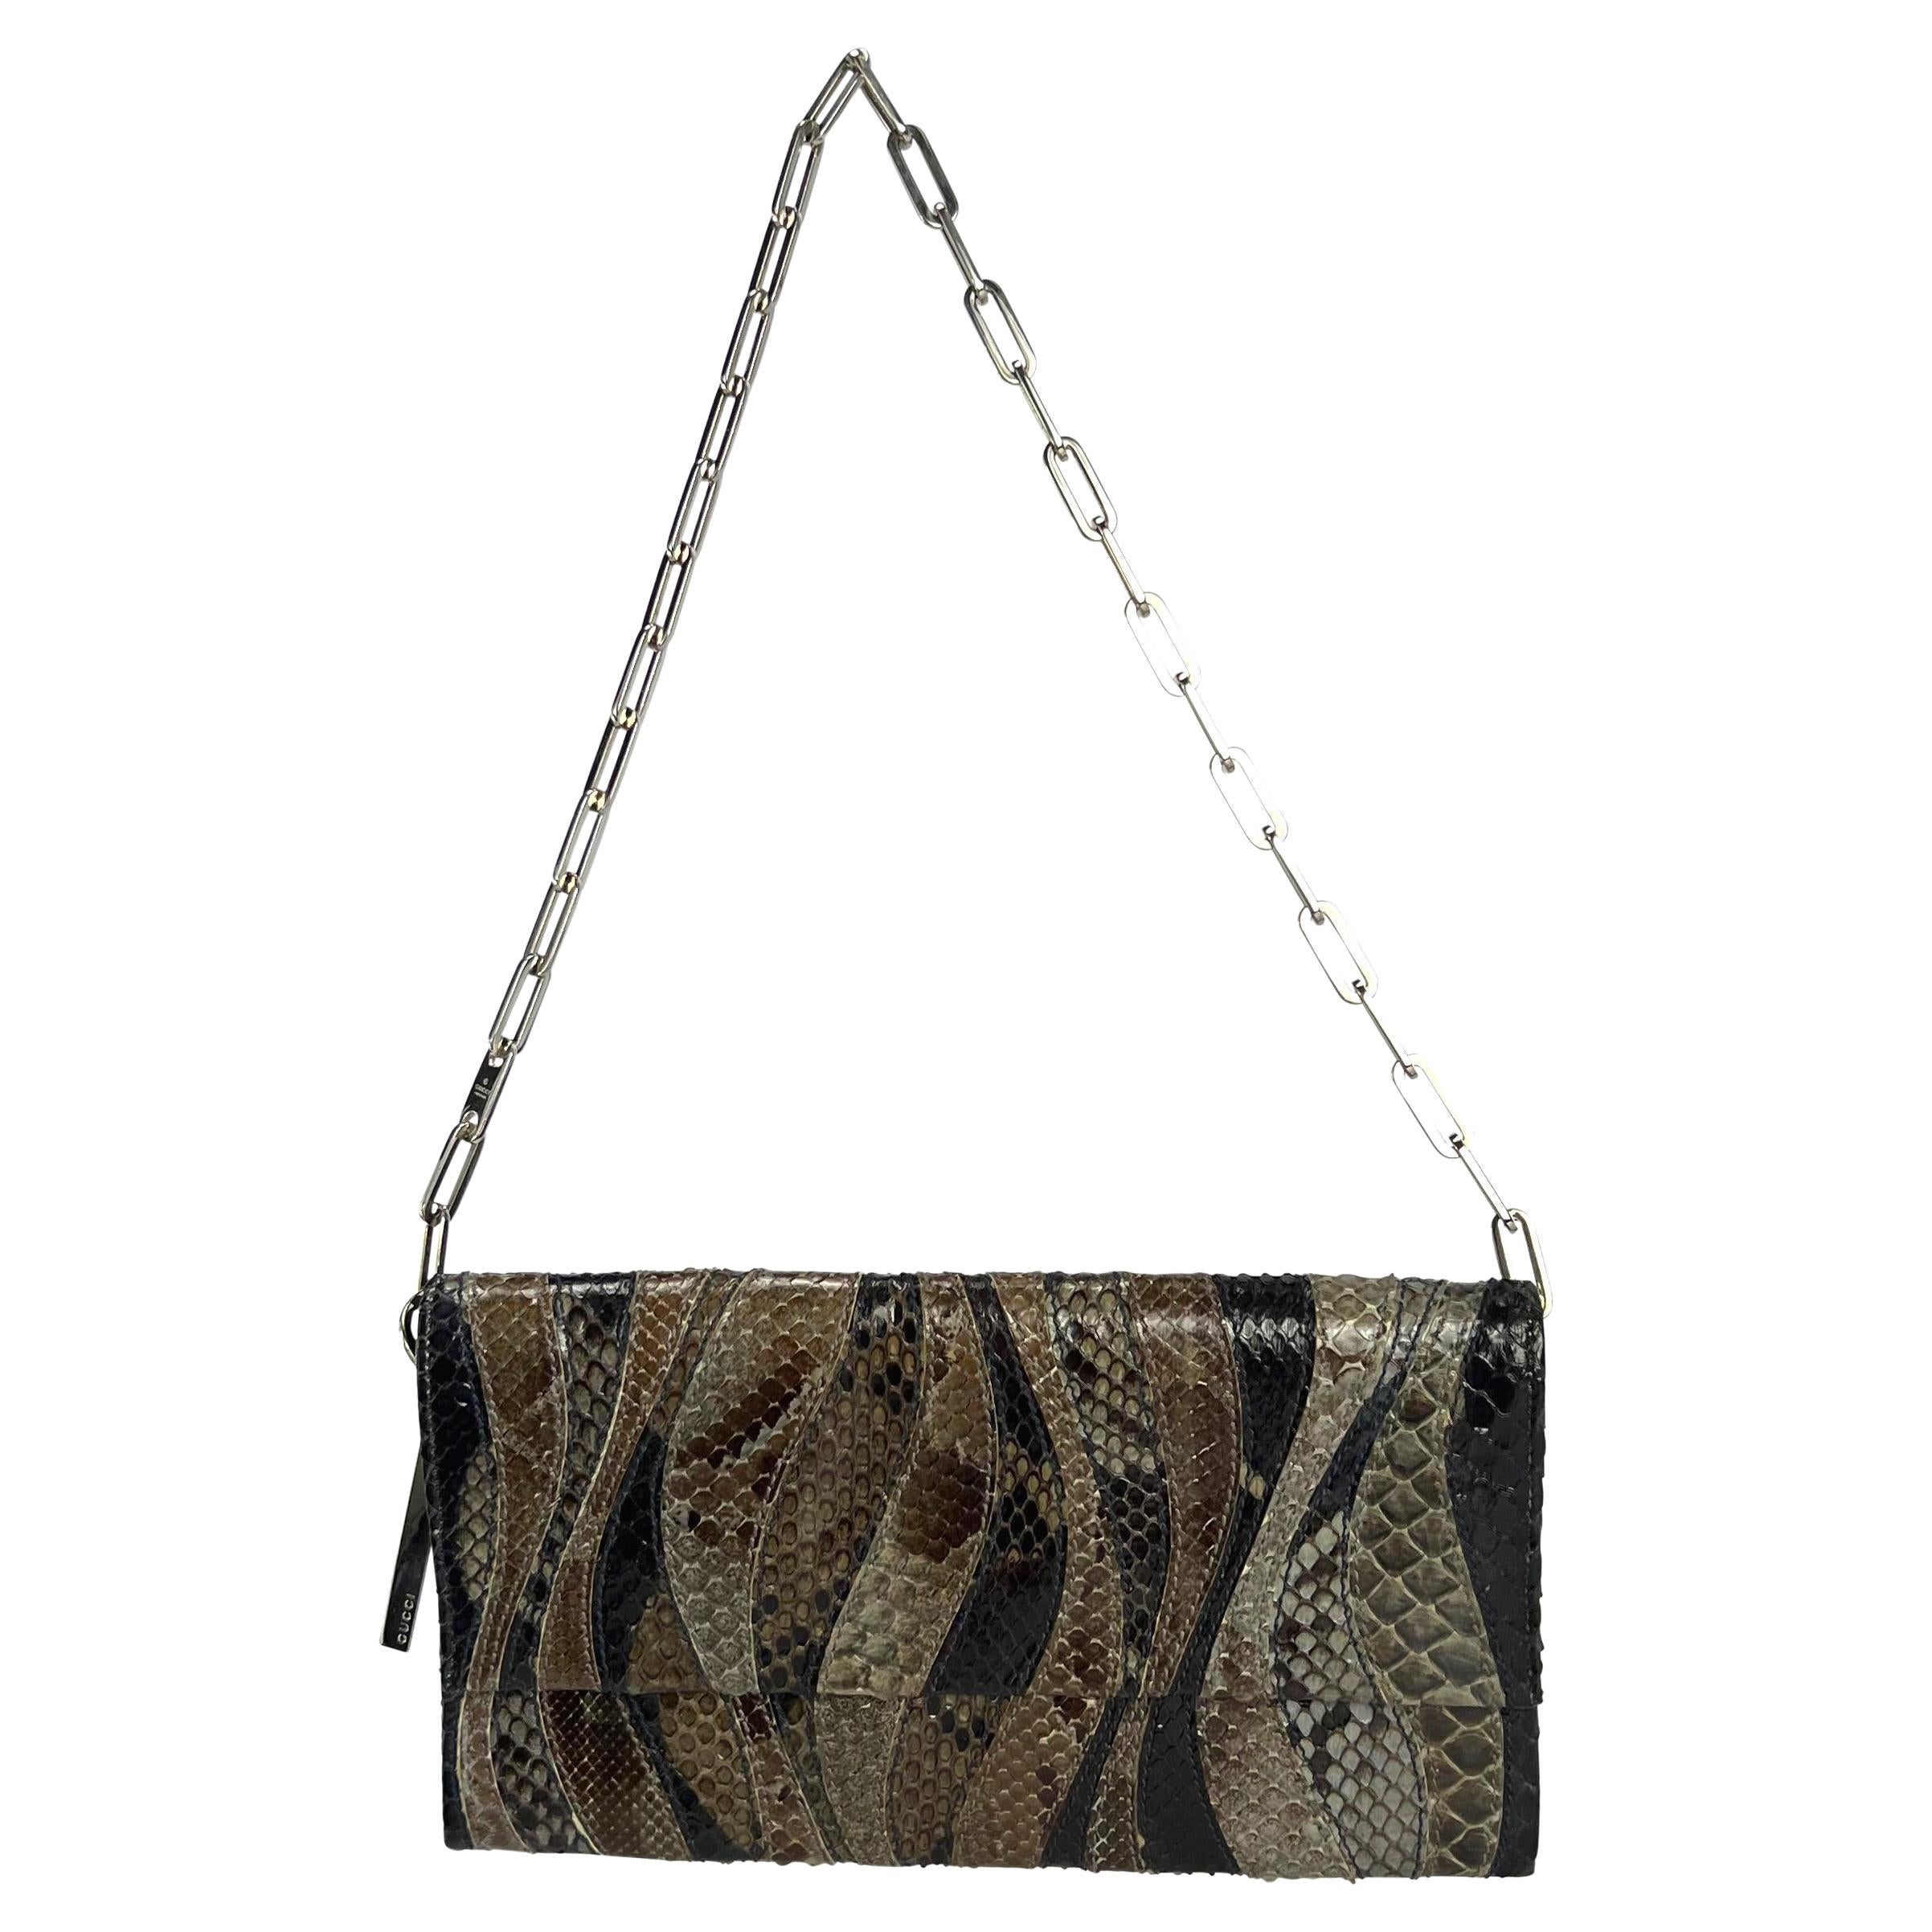 S/S 2000 Gucci by Tom Ford Python Abstract Panel Chain Flap Bag 